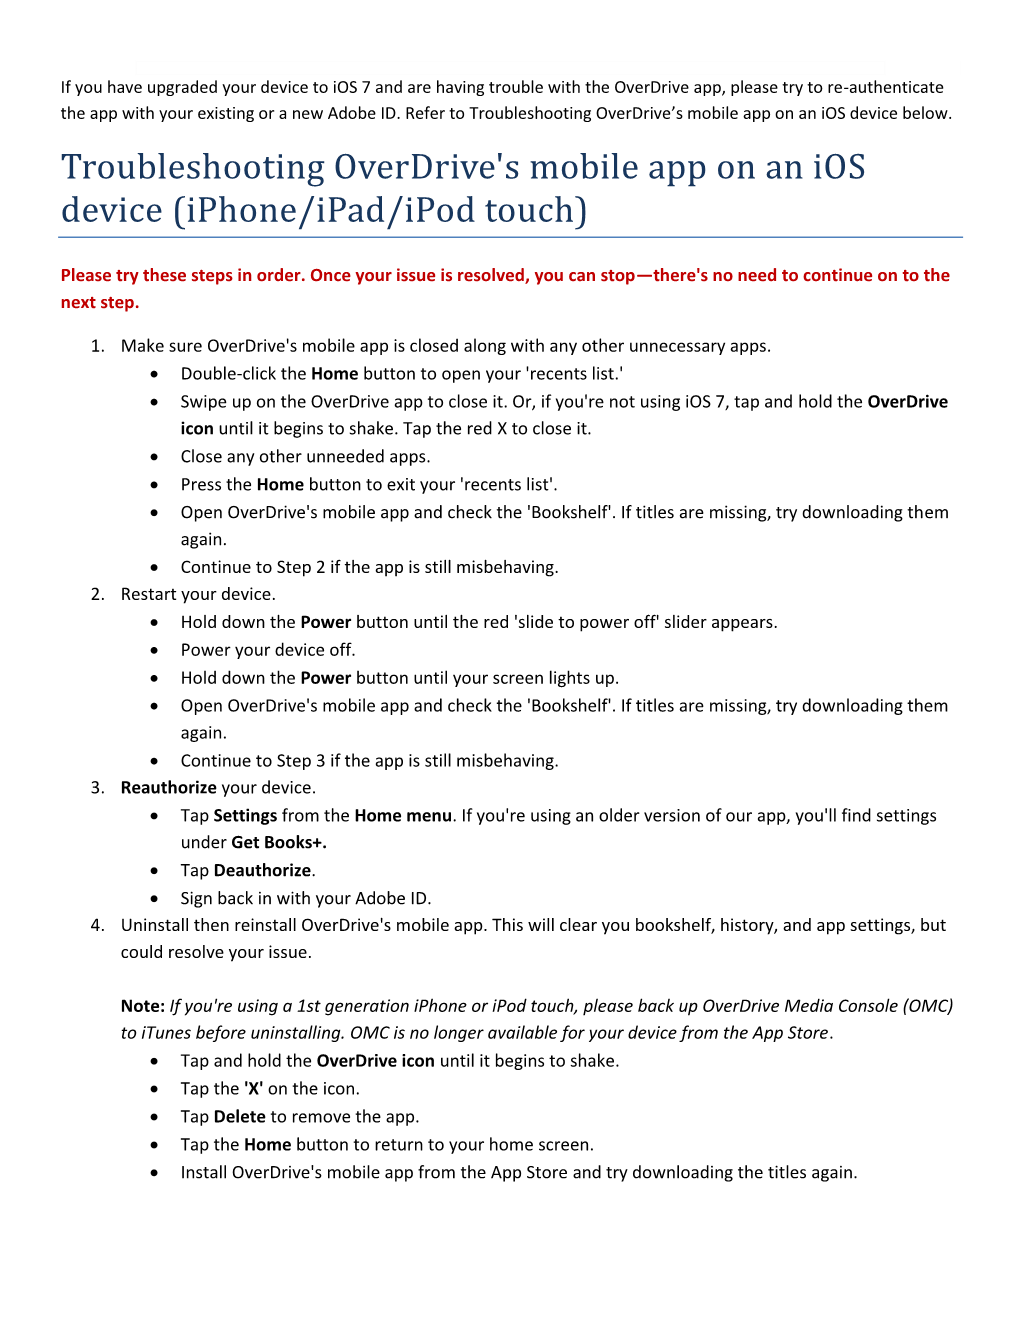 Troubleshooting Overdrive's Mobile App on an Ios Device (Iphone/Ipad/Ipod Touch)